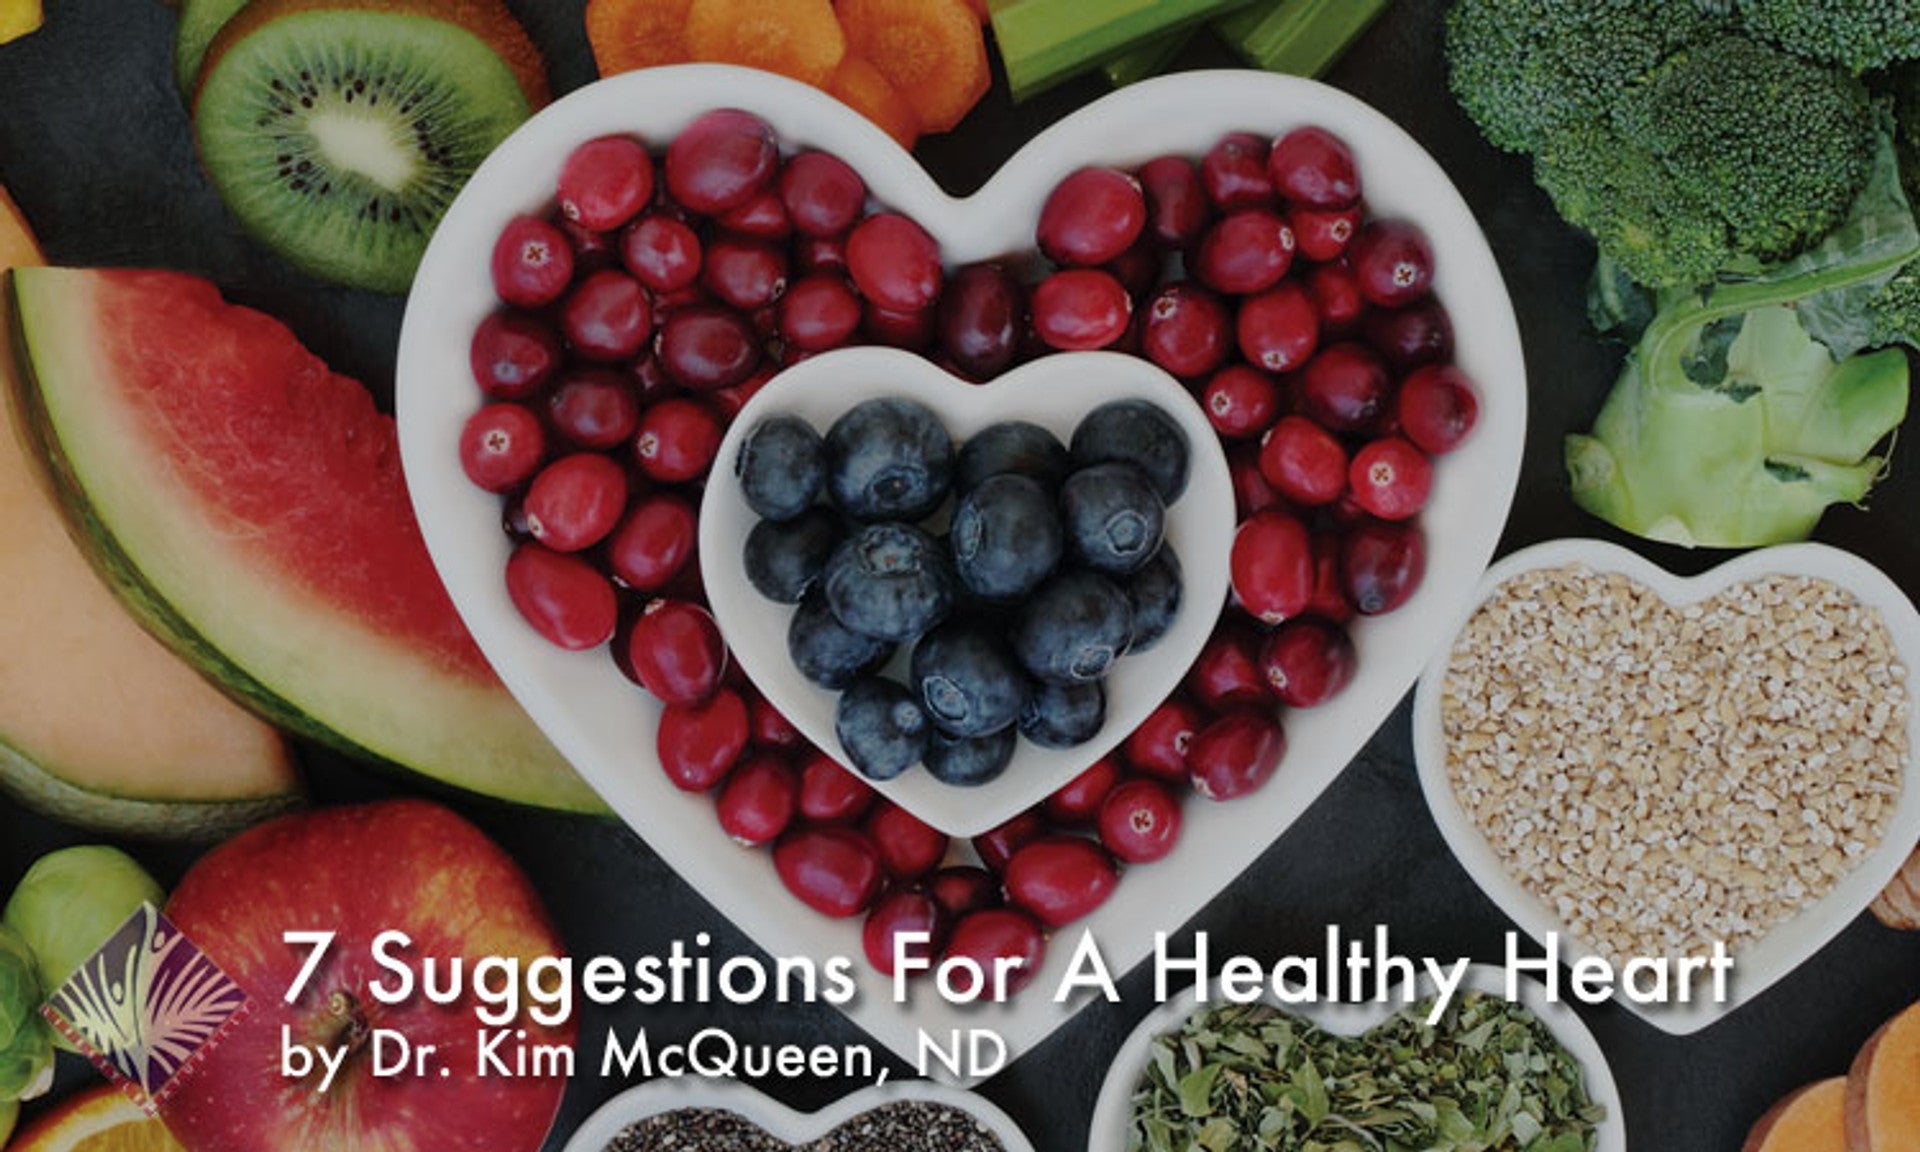 7 Suggestions for a Healthy Heart